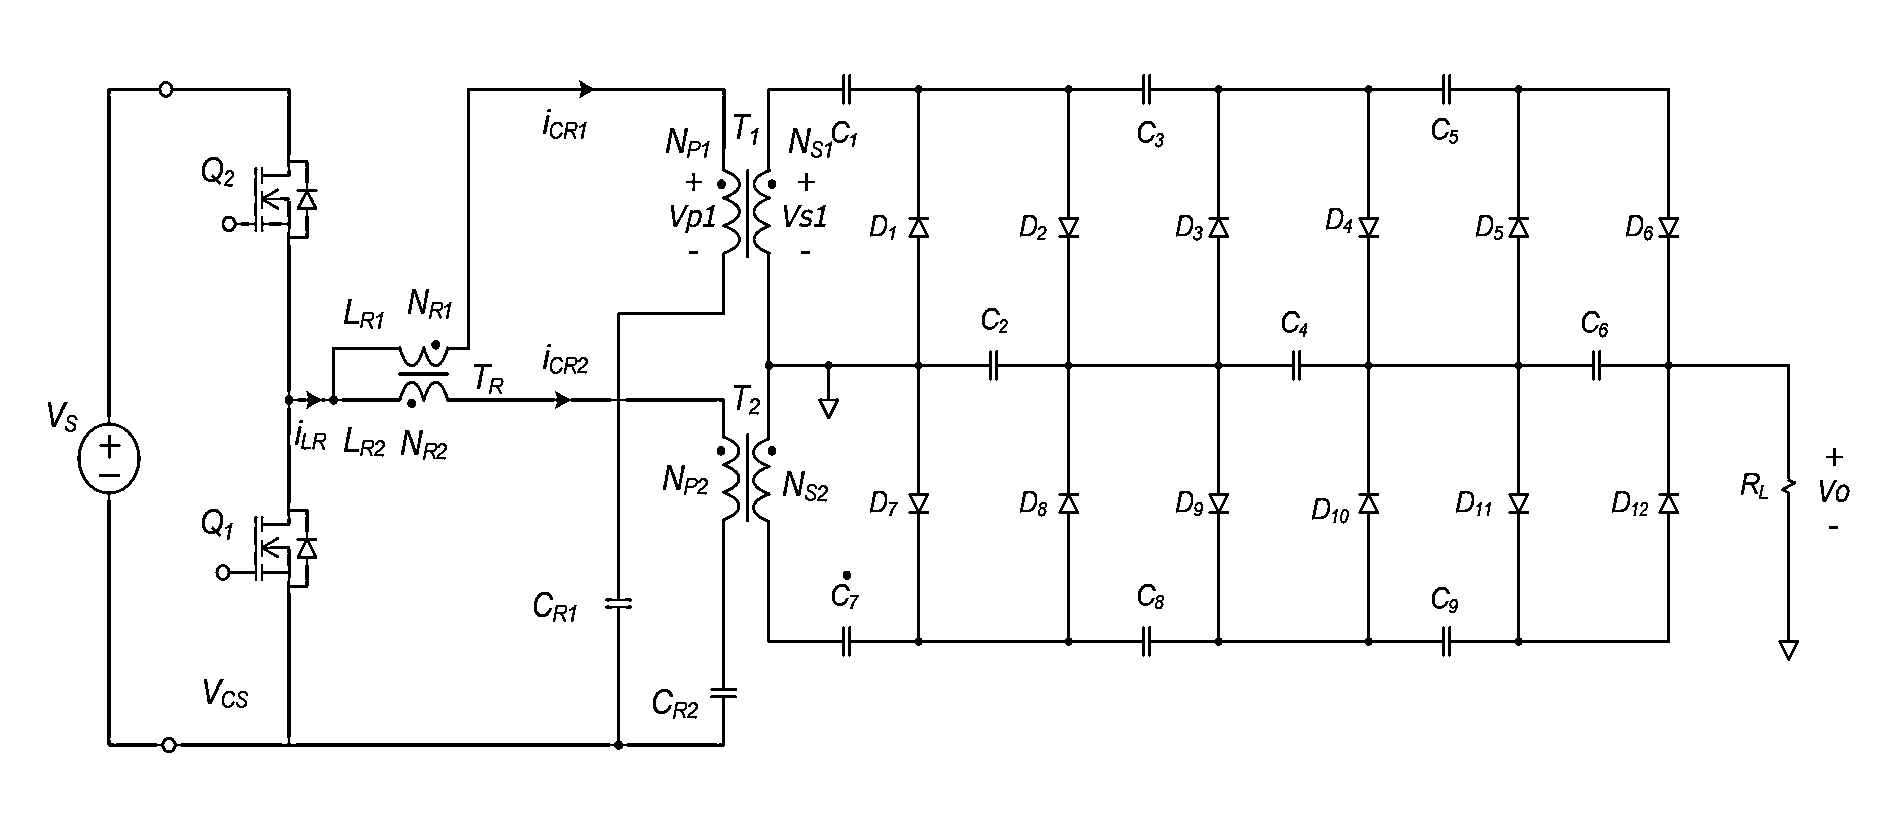 High voltage switching power supply